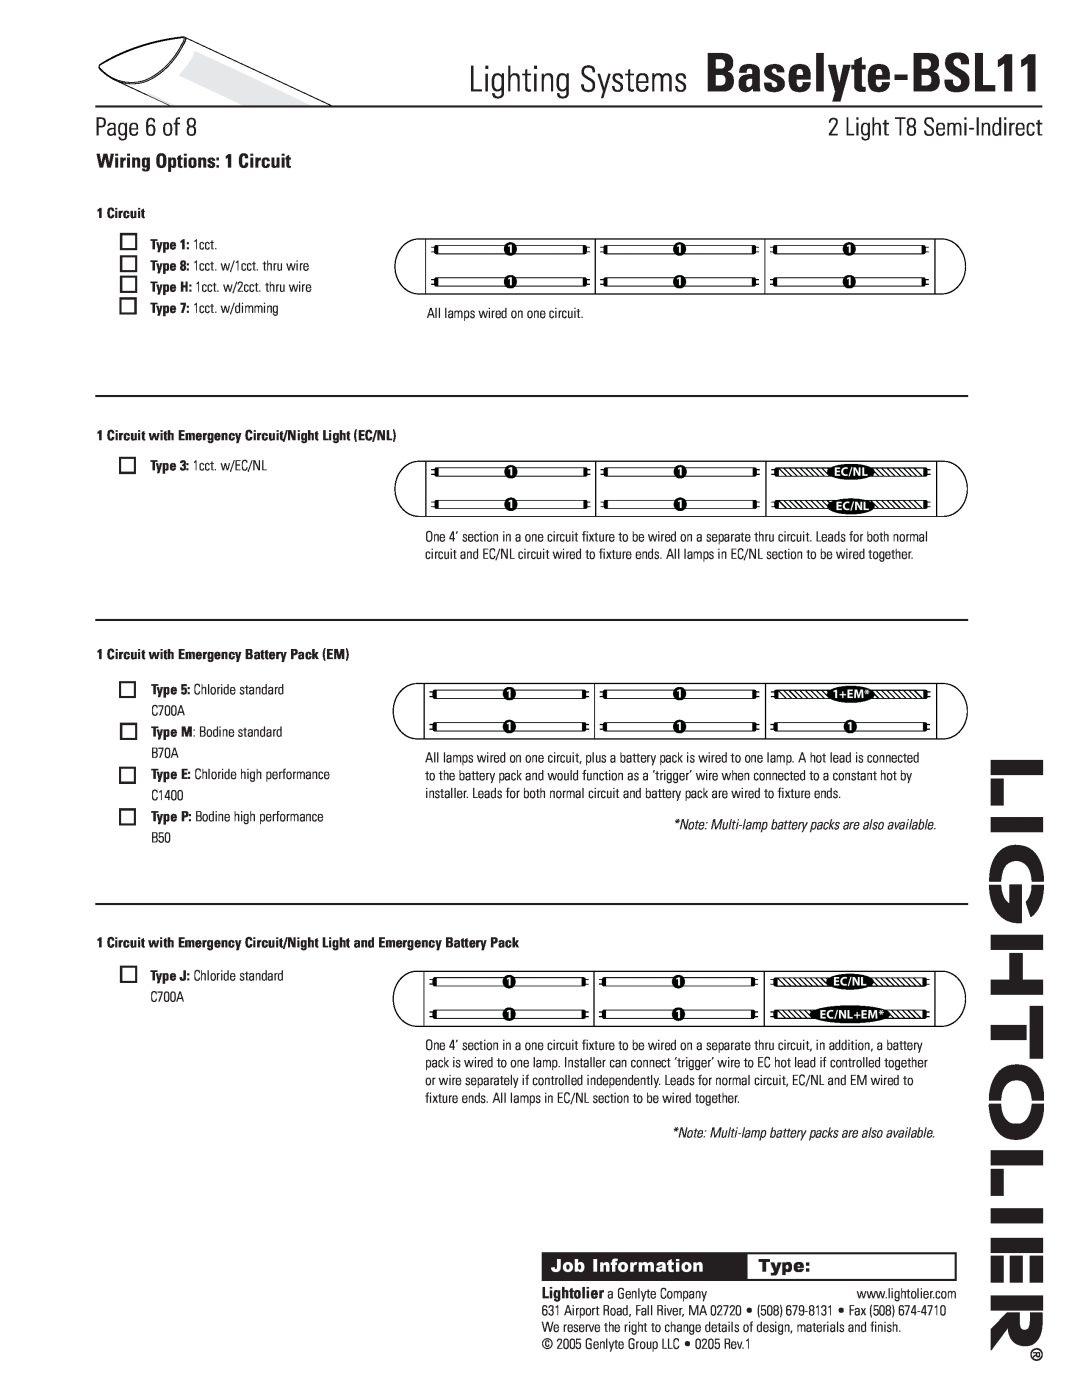 Lightolier Baselyte-BSL11 Wiring Options 1 Circuit, Circuit Type 1 1cct, Circuit with Emergency Battery Pack EM, Page of 